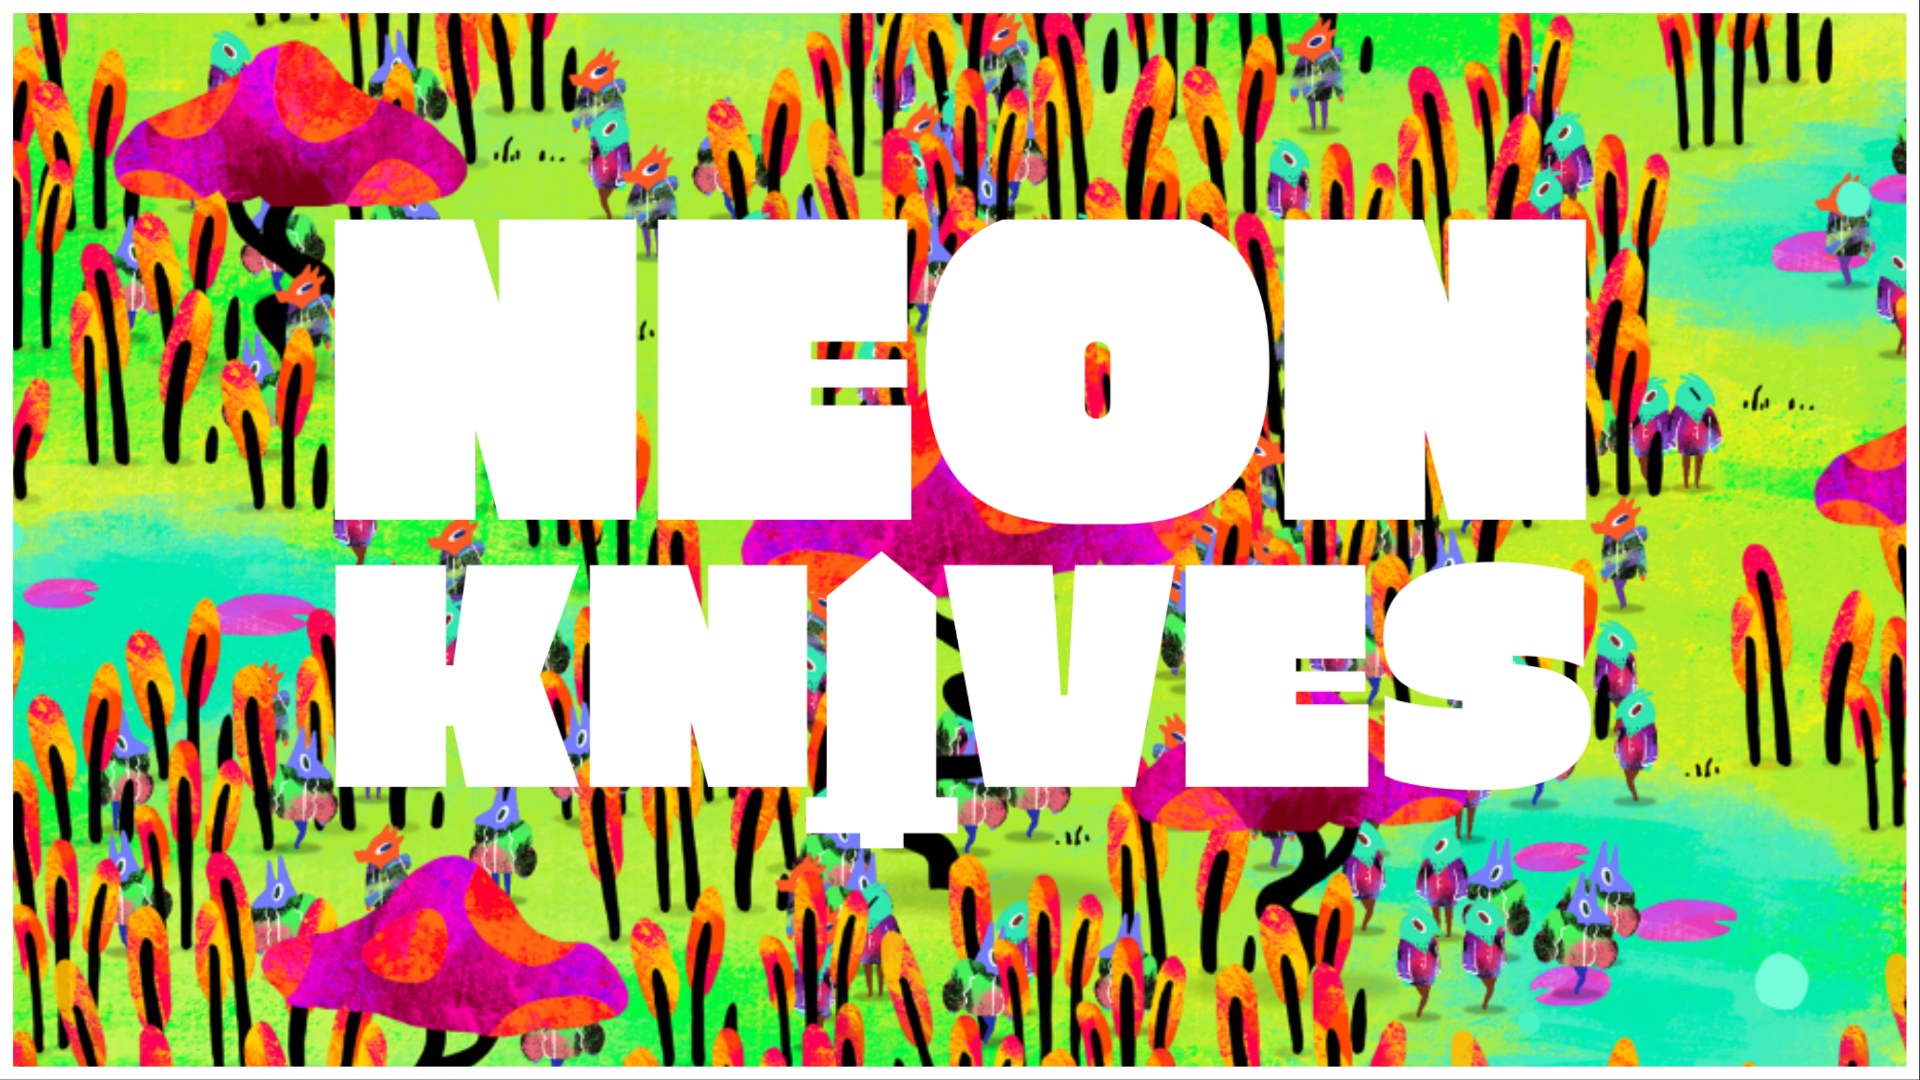 The image shows one of the colourful maps of neon knives with plenty of characters blending in around. The NEON KNIVES logo is in white across the front of the illustration